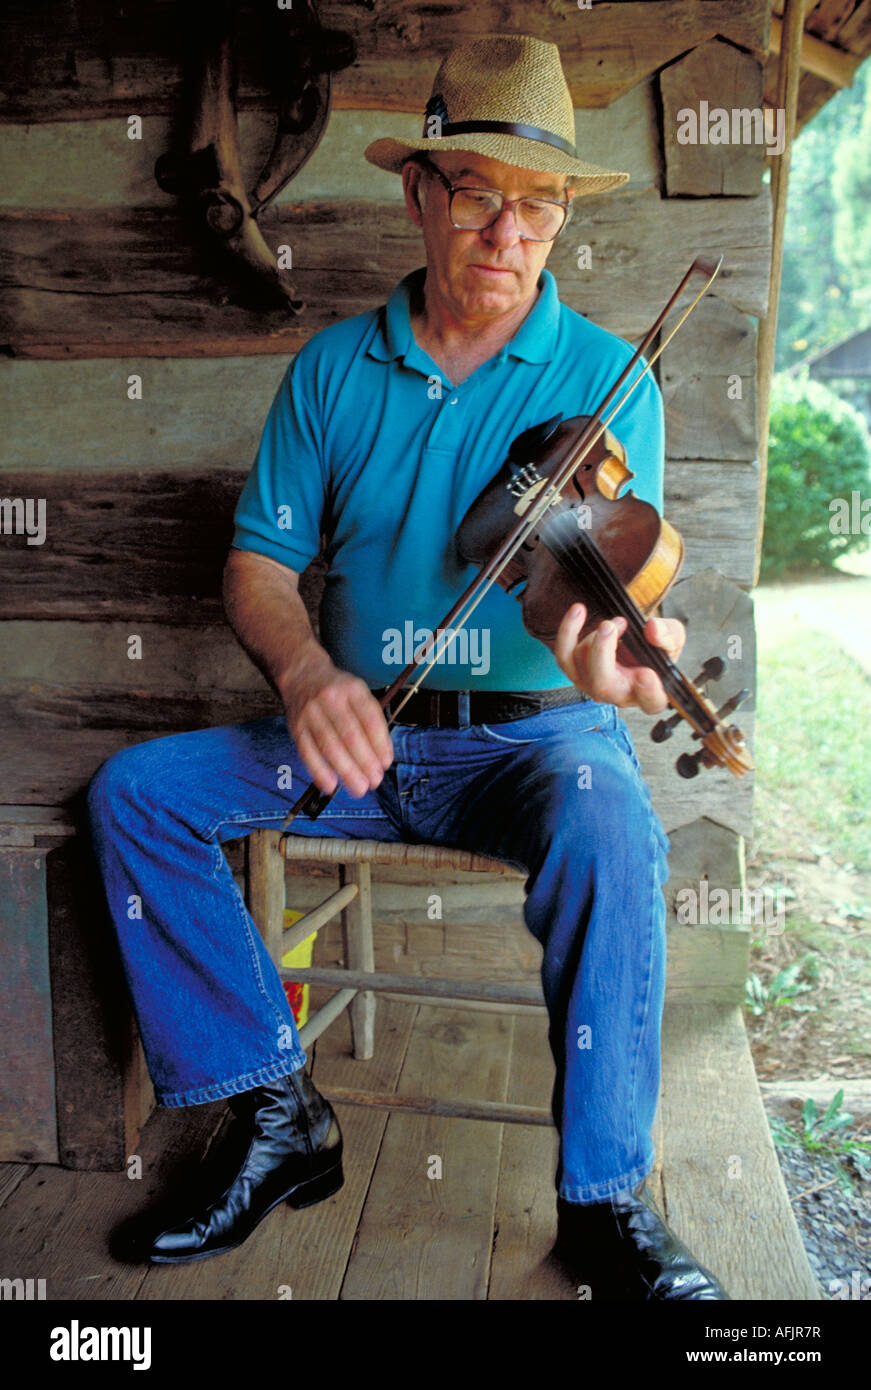 Elk217 2639 Tennessee Morris Museum of Appalachia fiddle player Stock Photo